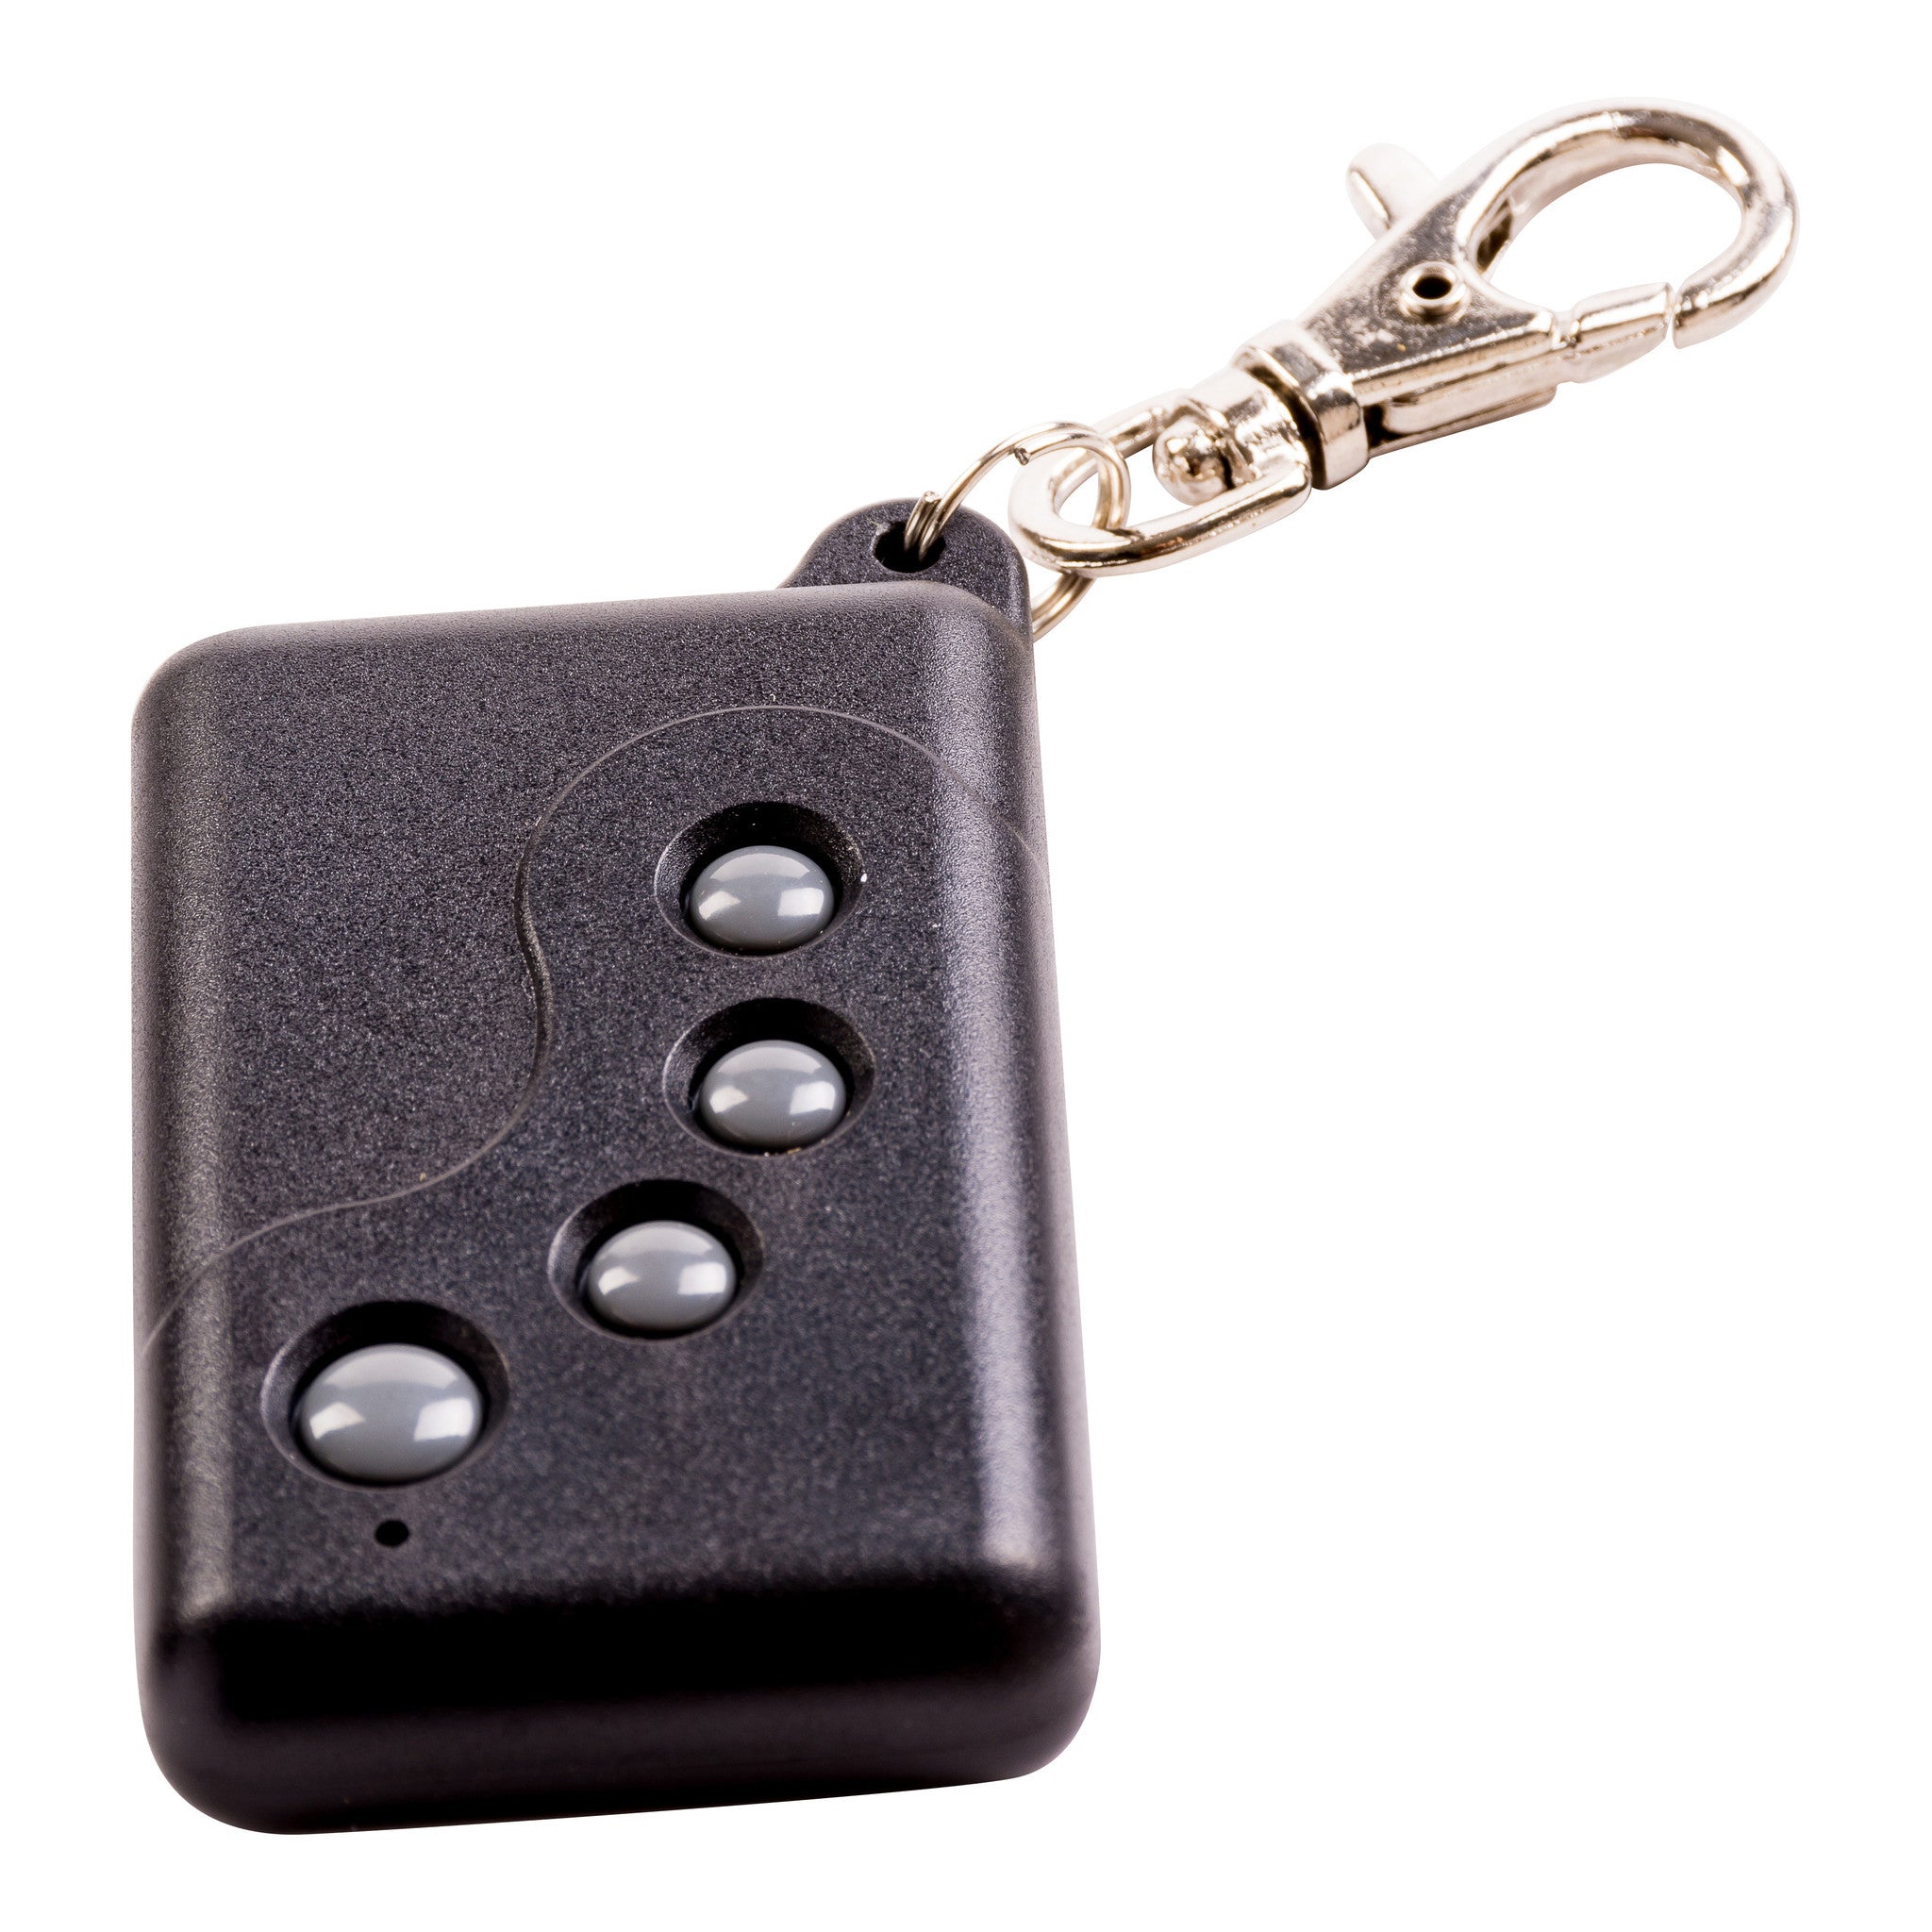 Four Channel Remote Control Fob - RC1 Product Image